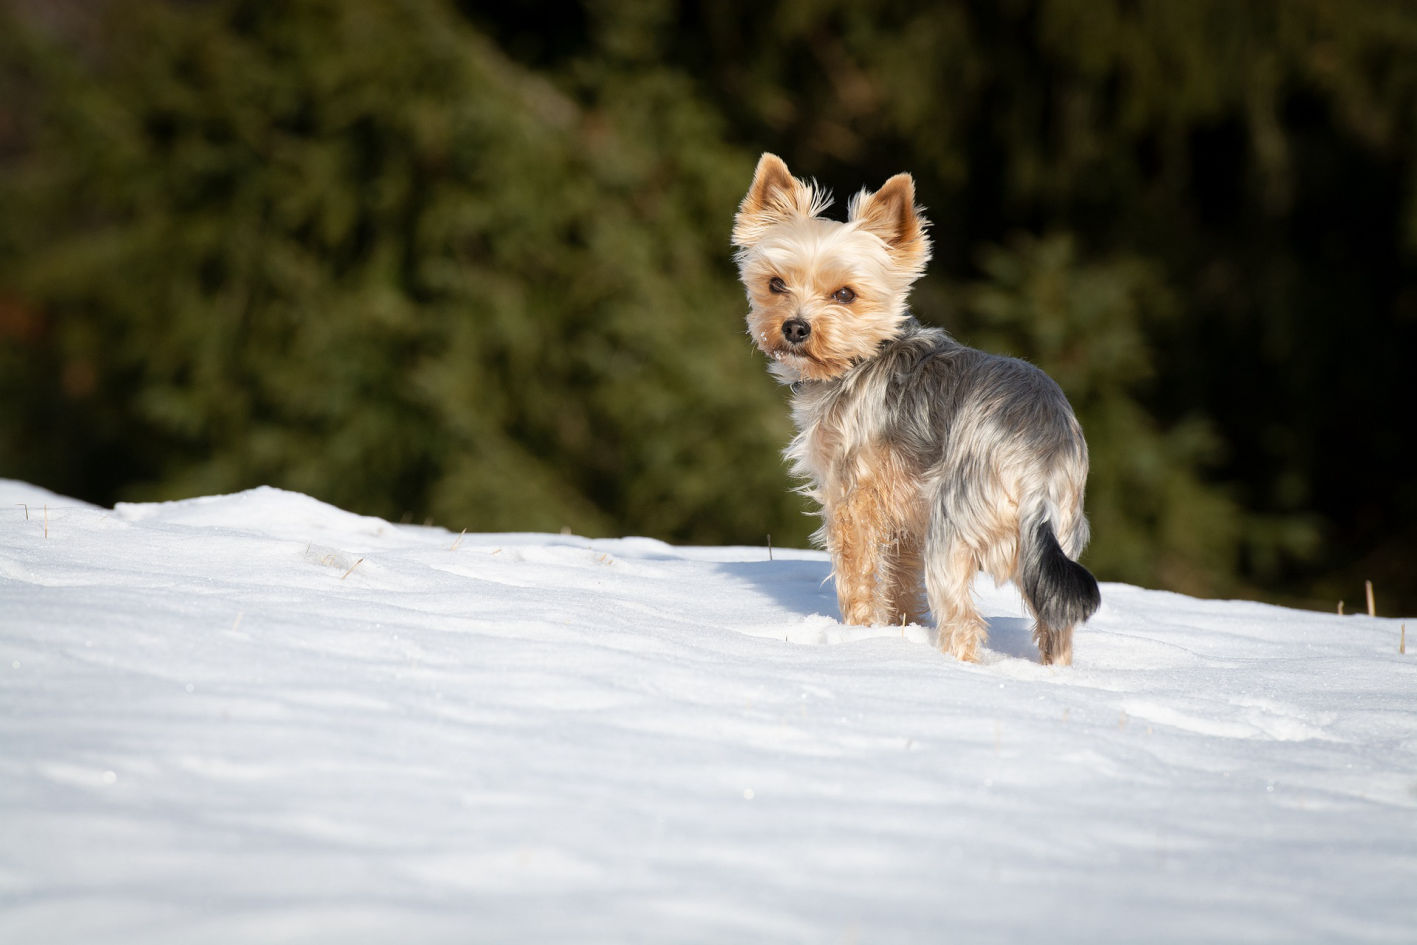  Yorkie (Yorkshire terrier) playing